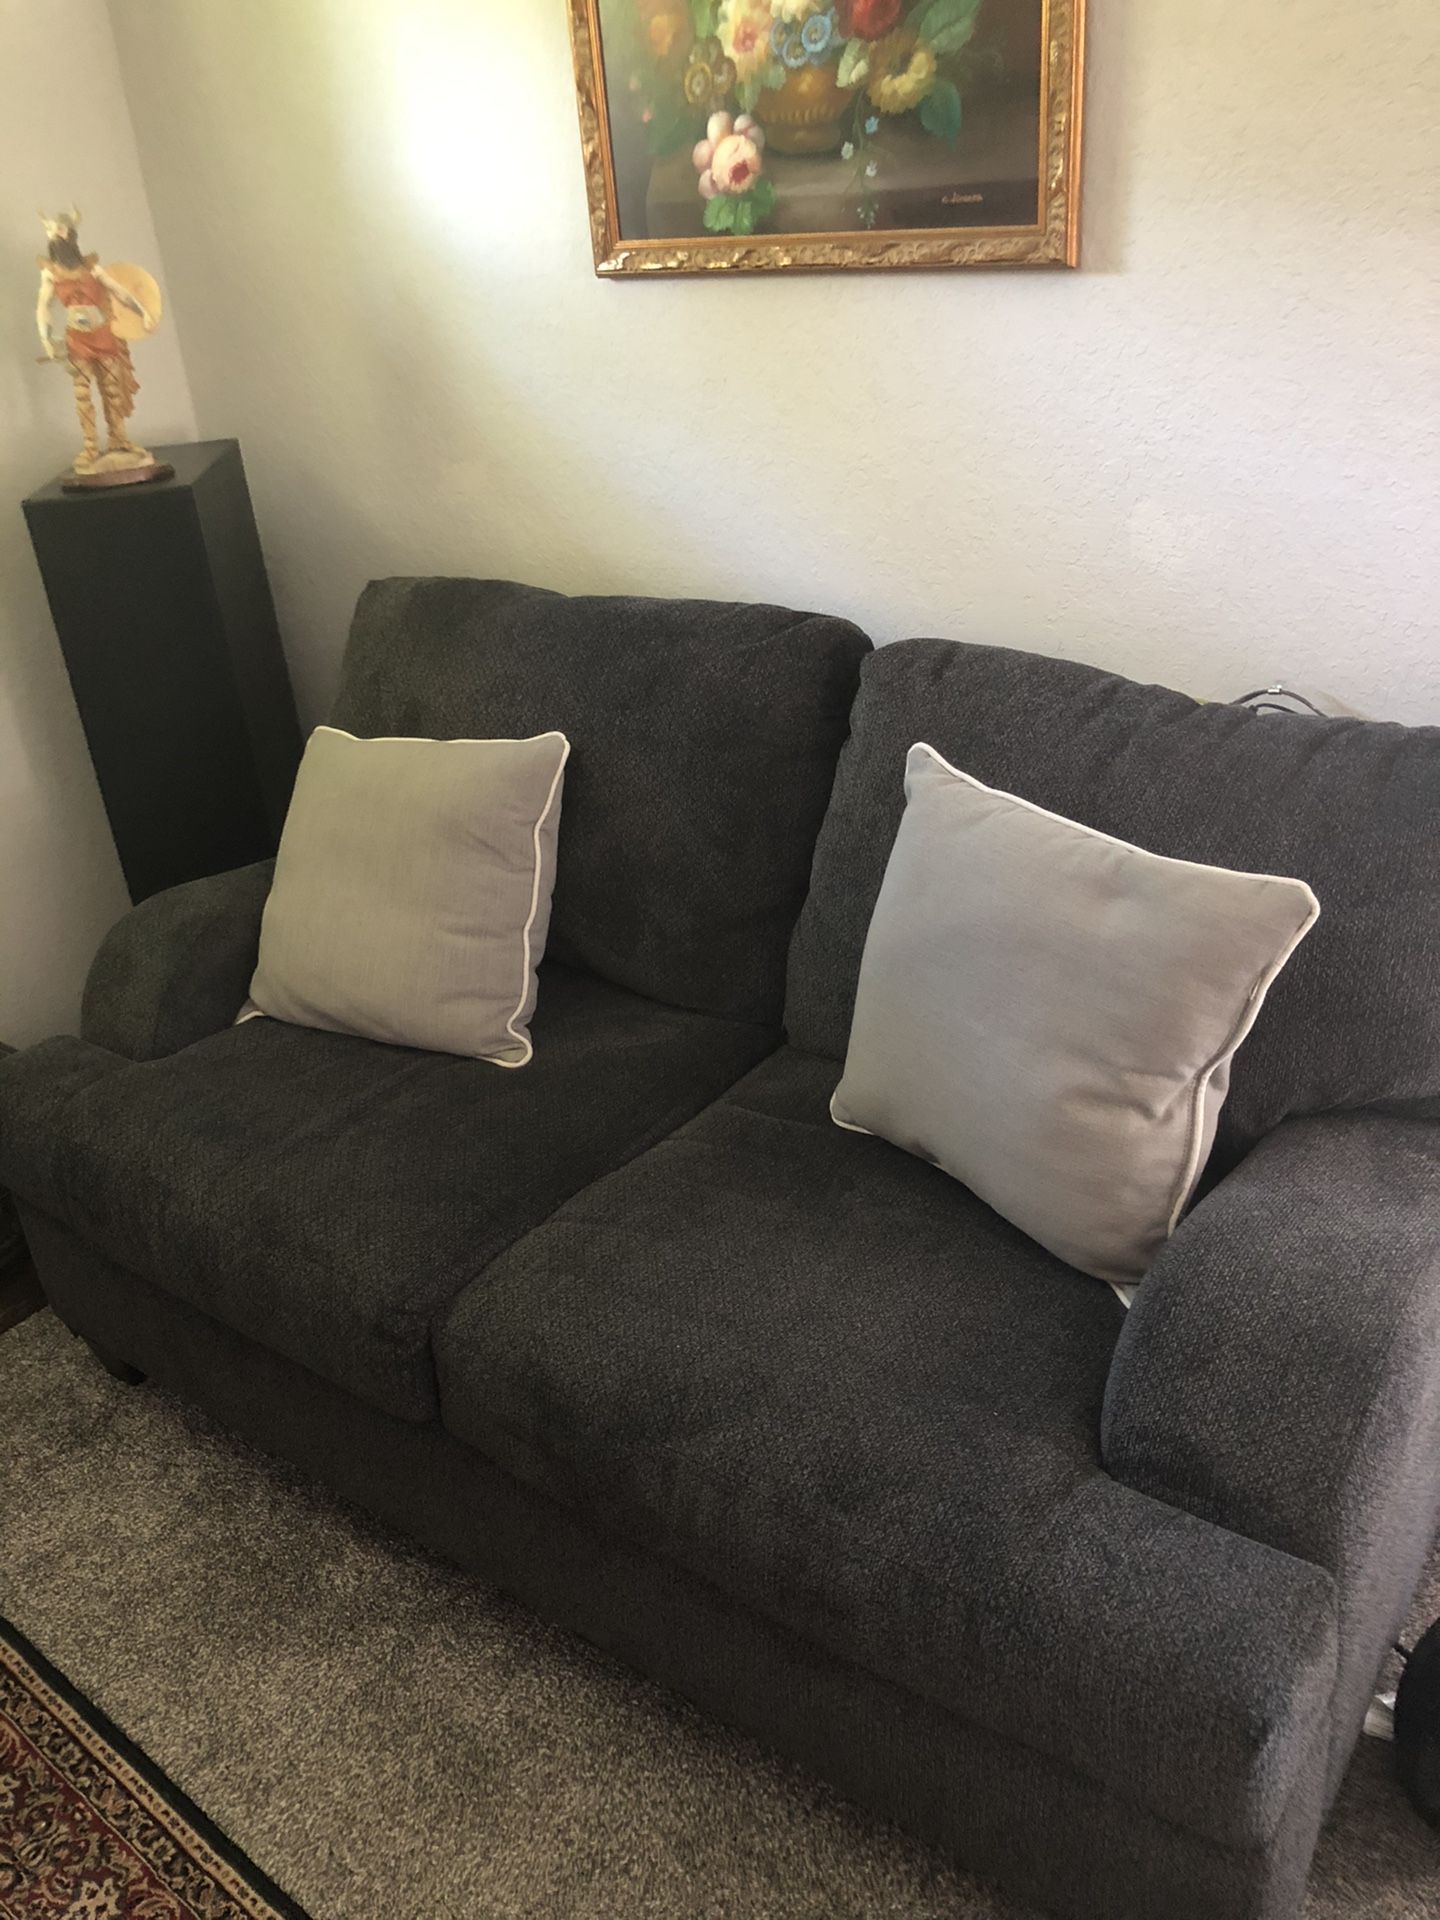 Simmons couch and love seat 7 ‘ & 5’ couches smoke free home approximately 1 year old barely used . I’m moving